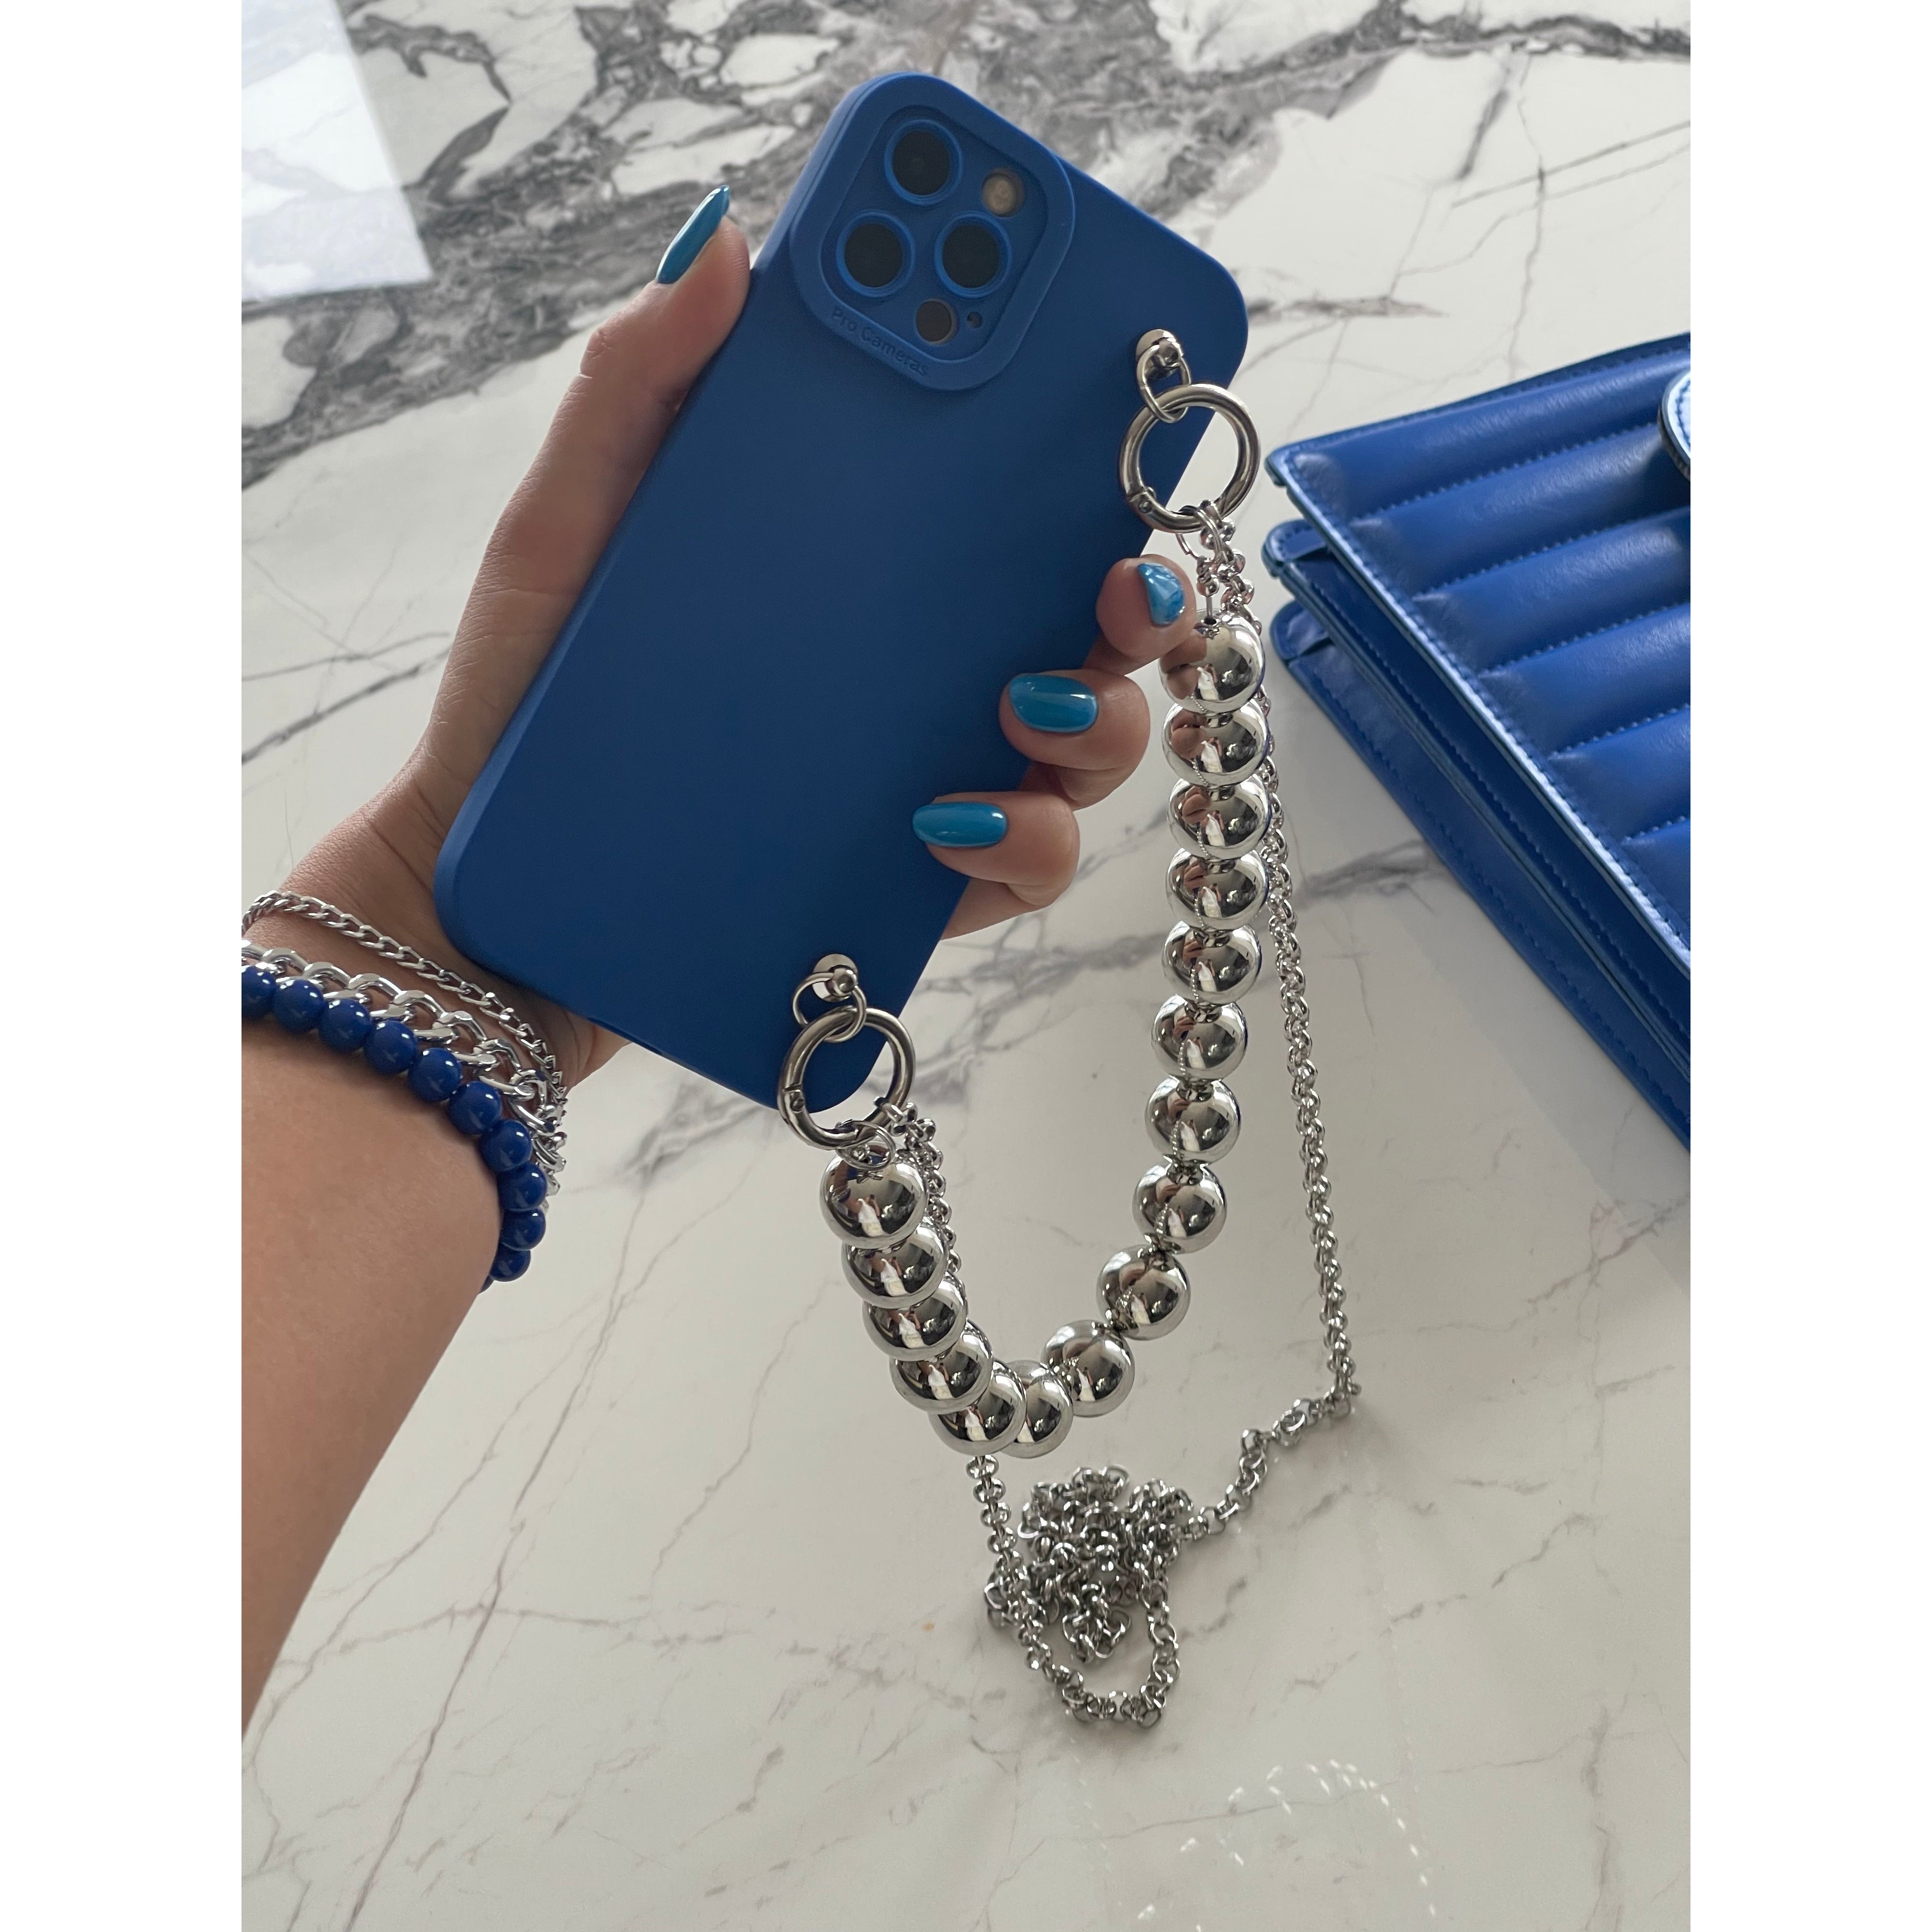 Blue iPhone Case With Silver Beads Strap